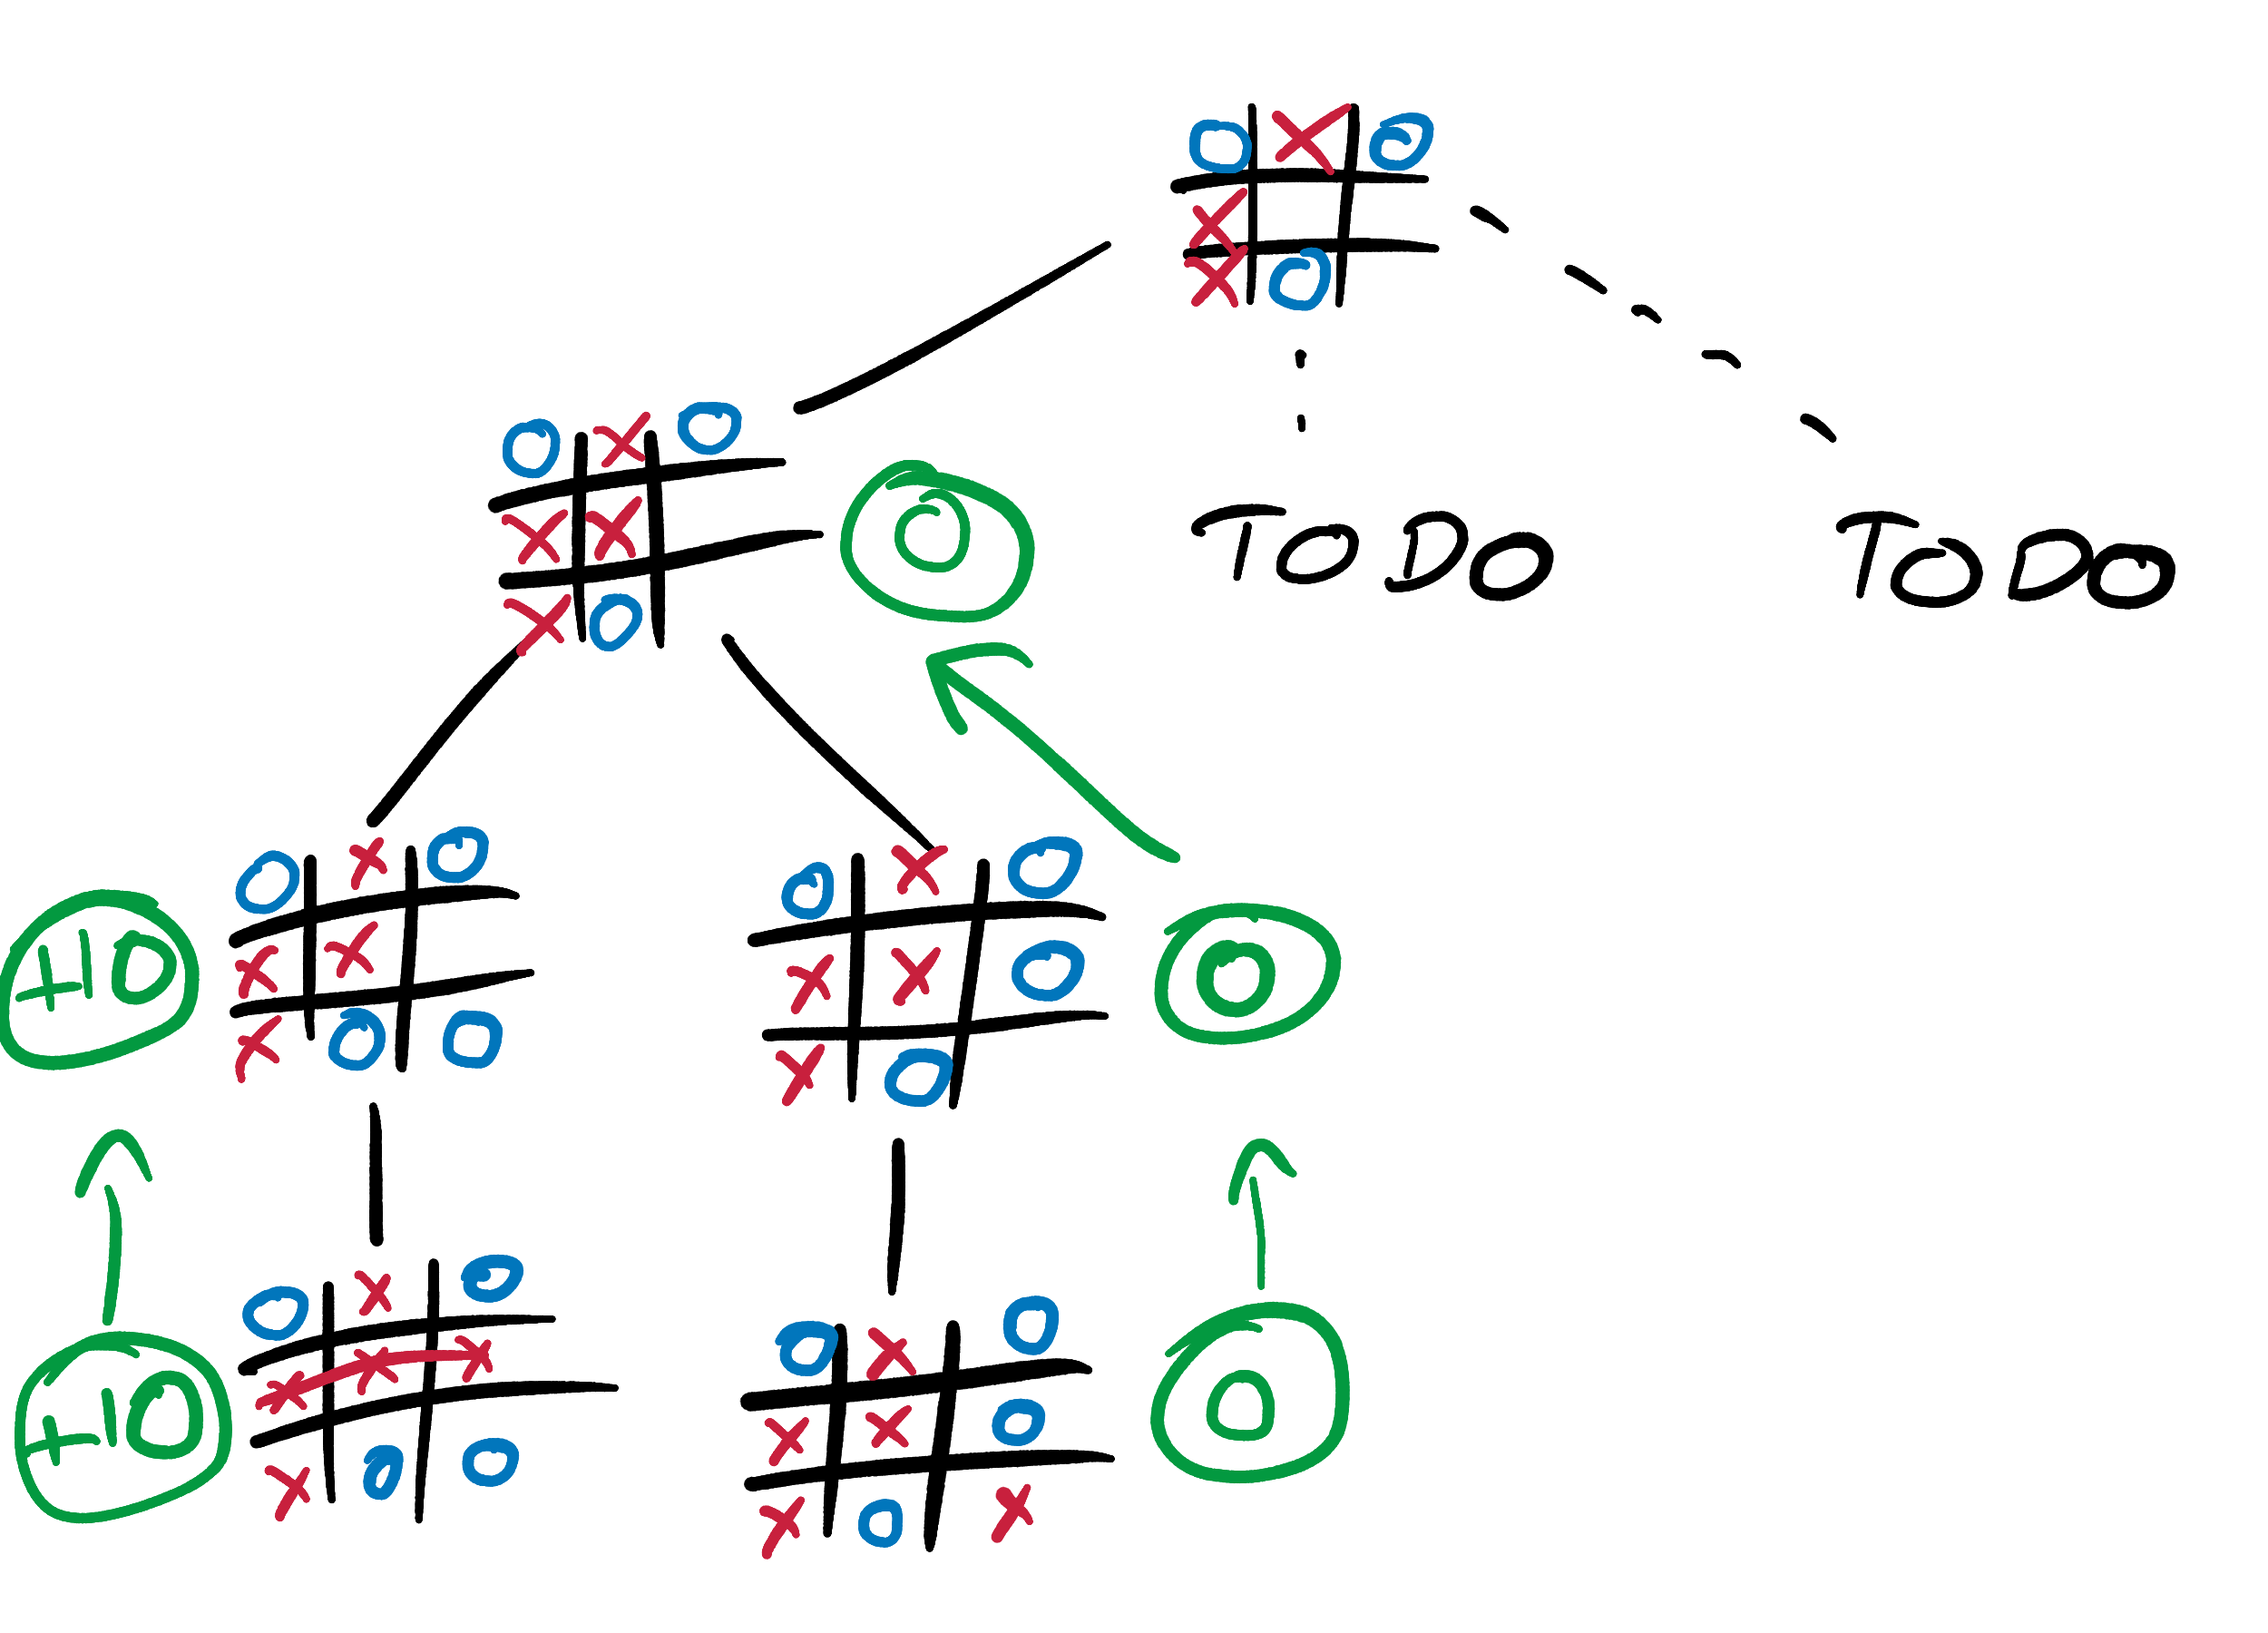 Minimax algorithm tic tac toe in c++ with source code 